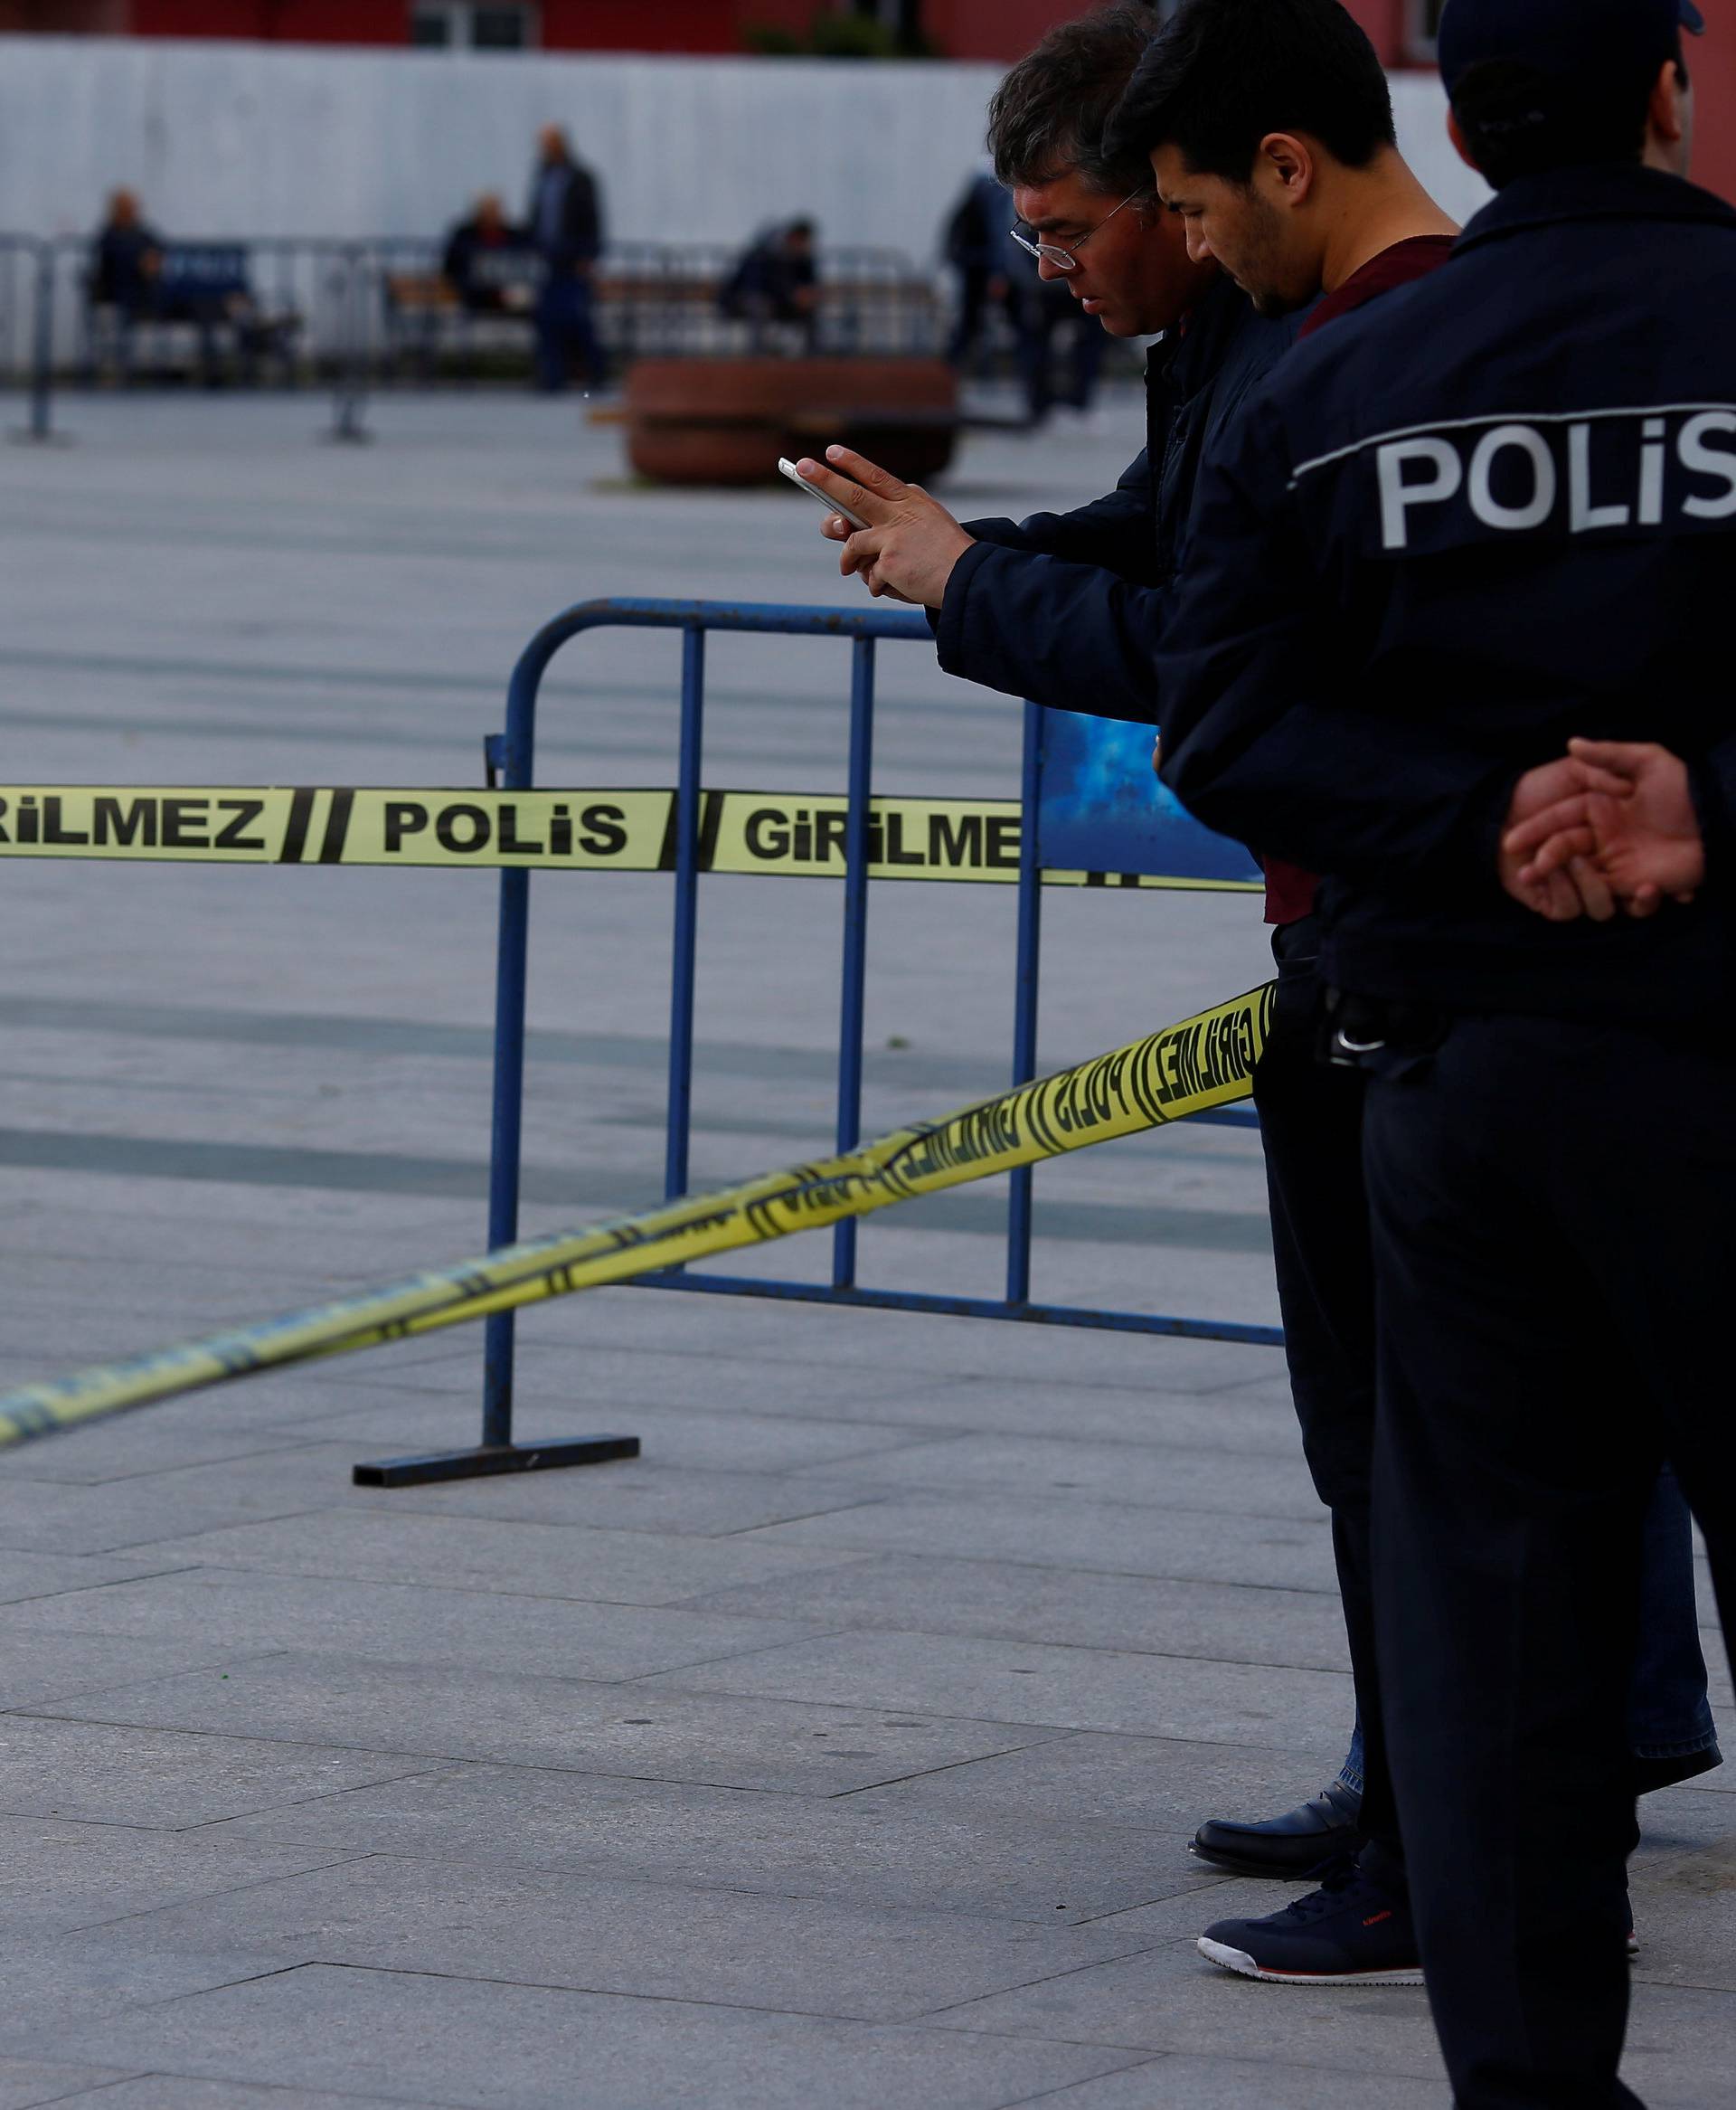 Turkish riot policemen secure the area after an attack aganist Can Dundar, editor-in-chief of Cumhuriyet in front of the Justice Palace in Istanbul